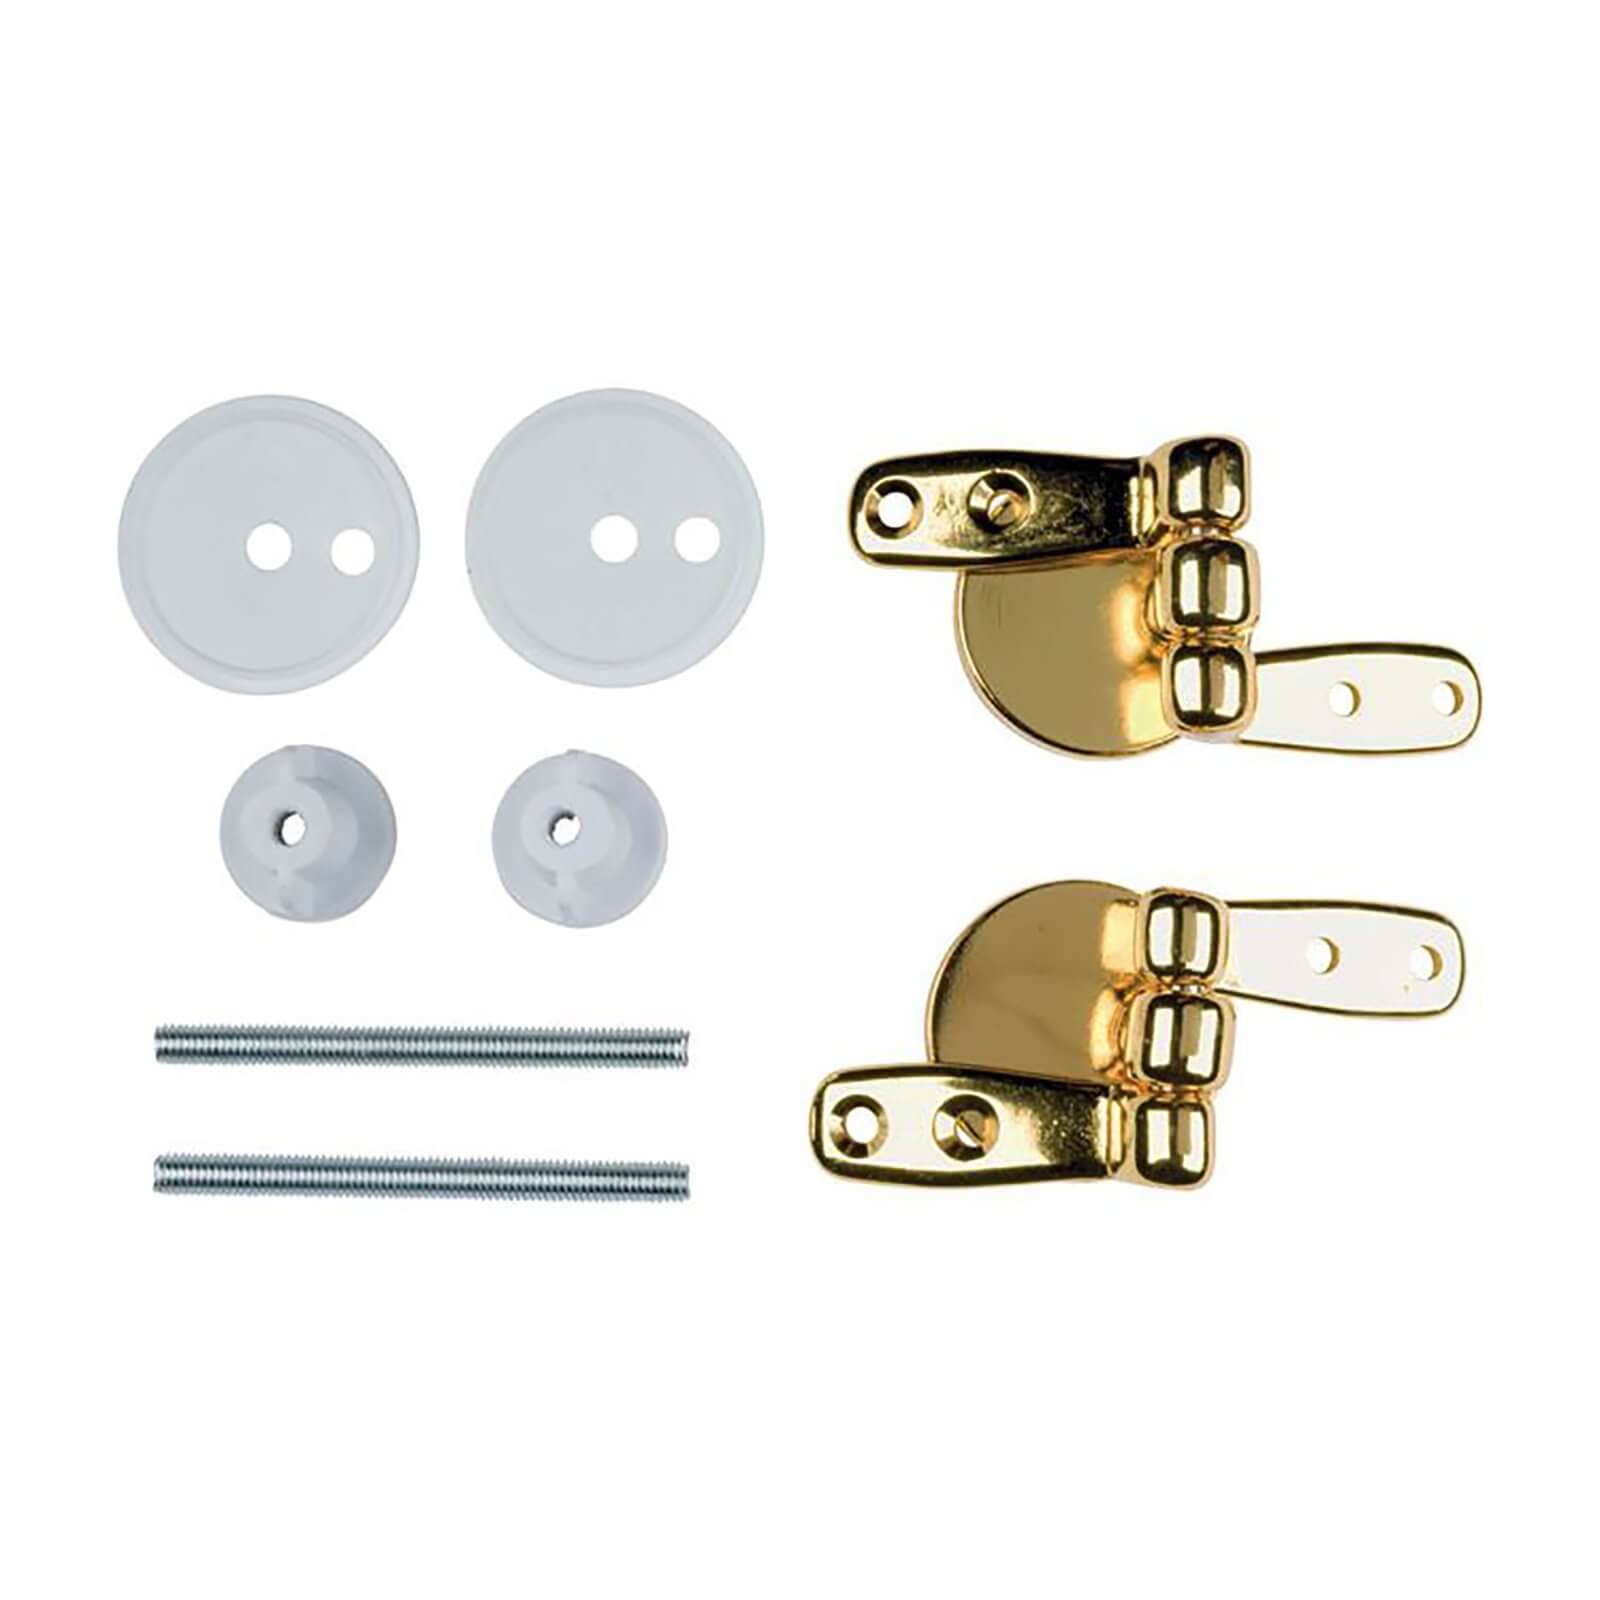 Photo of Toilet Seat Hinges - Brass Wooden